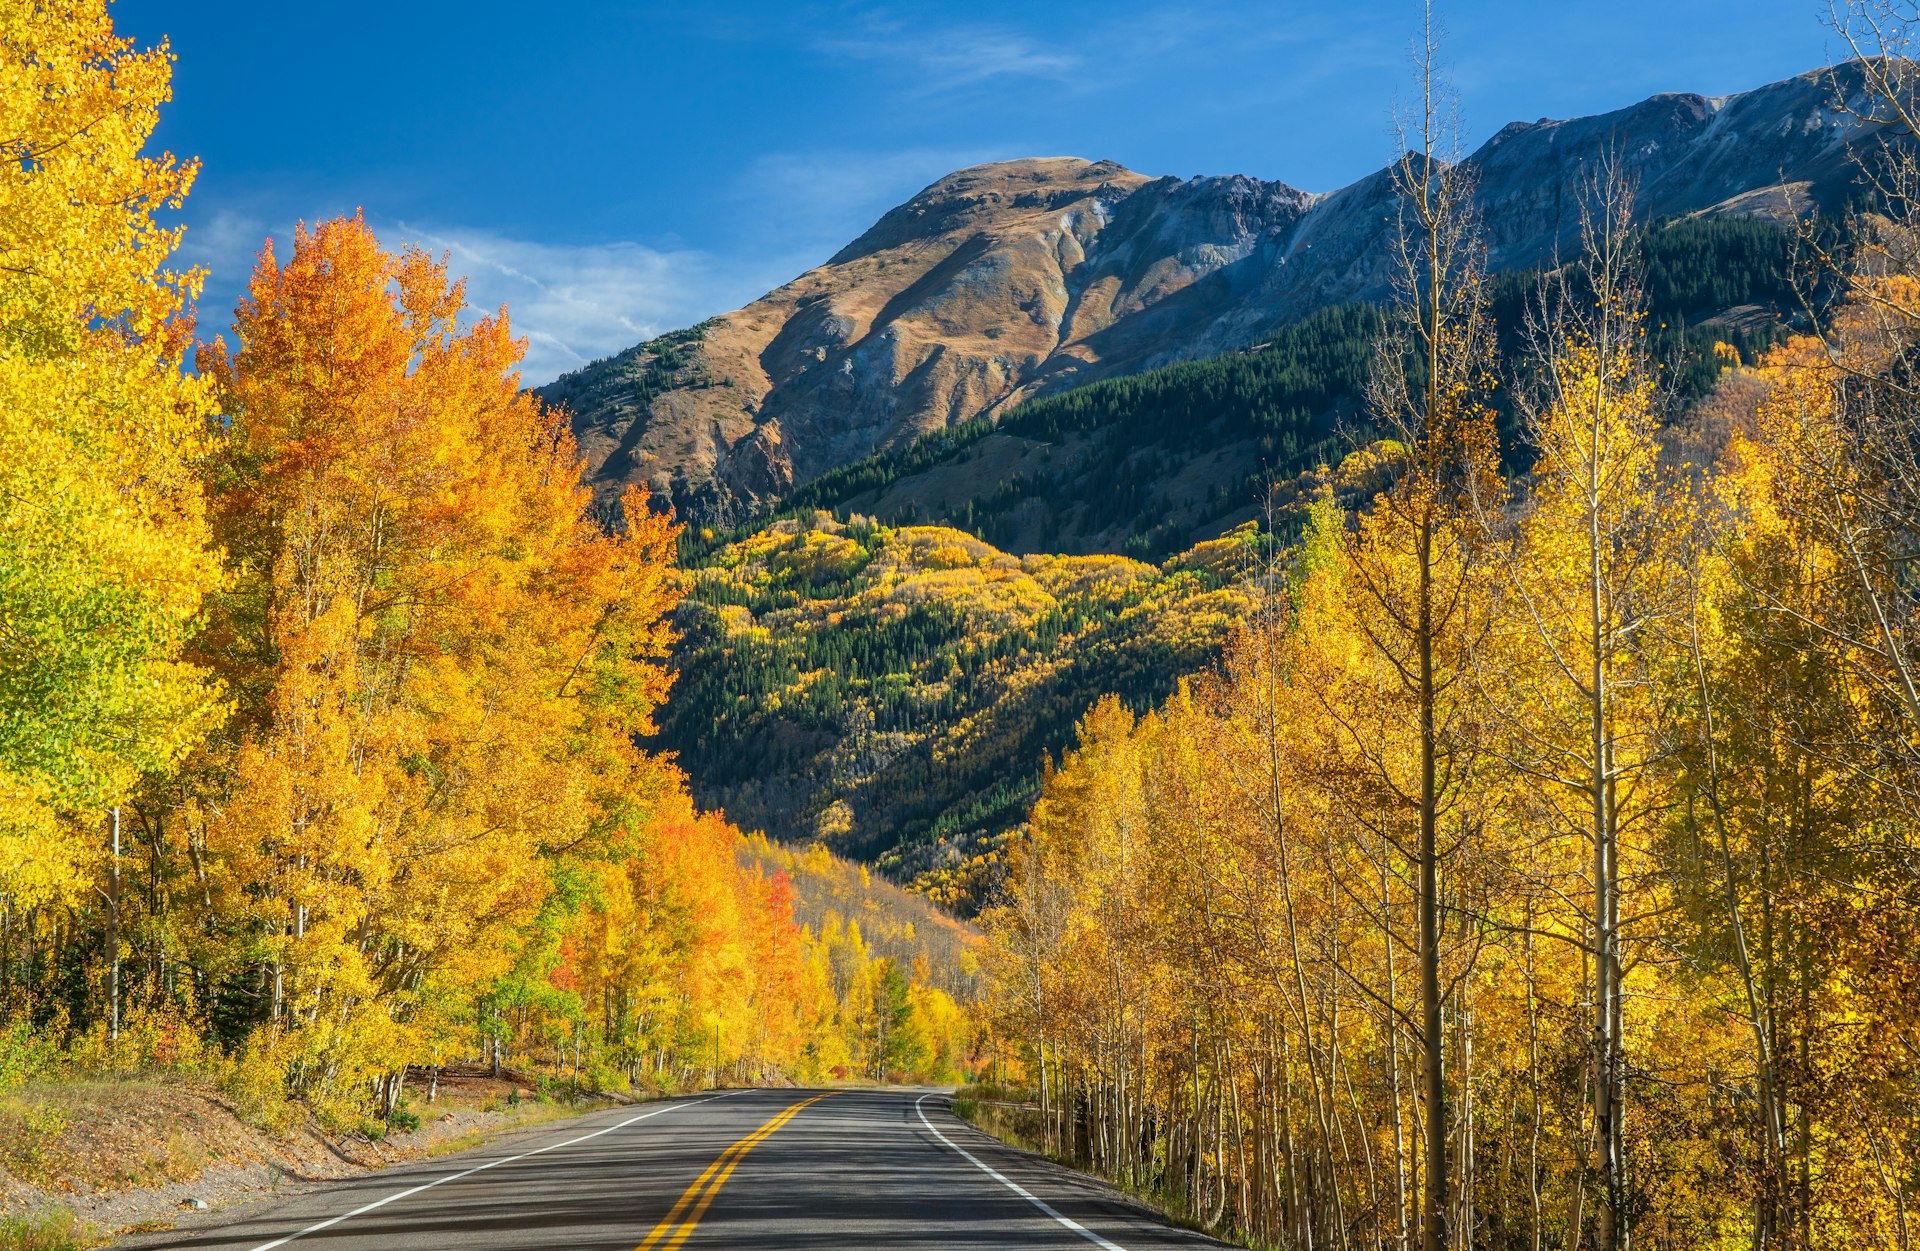 A road passes through bright orange trees, backed by the Rocky Mountains on the Million Dollar Highway in Colorado